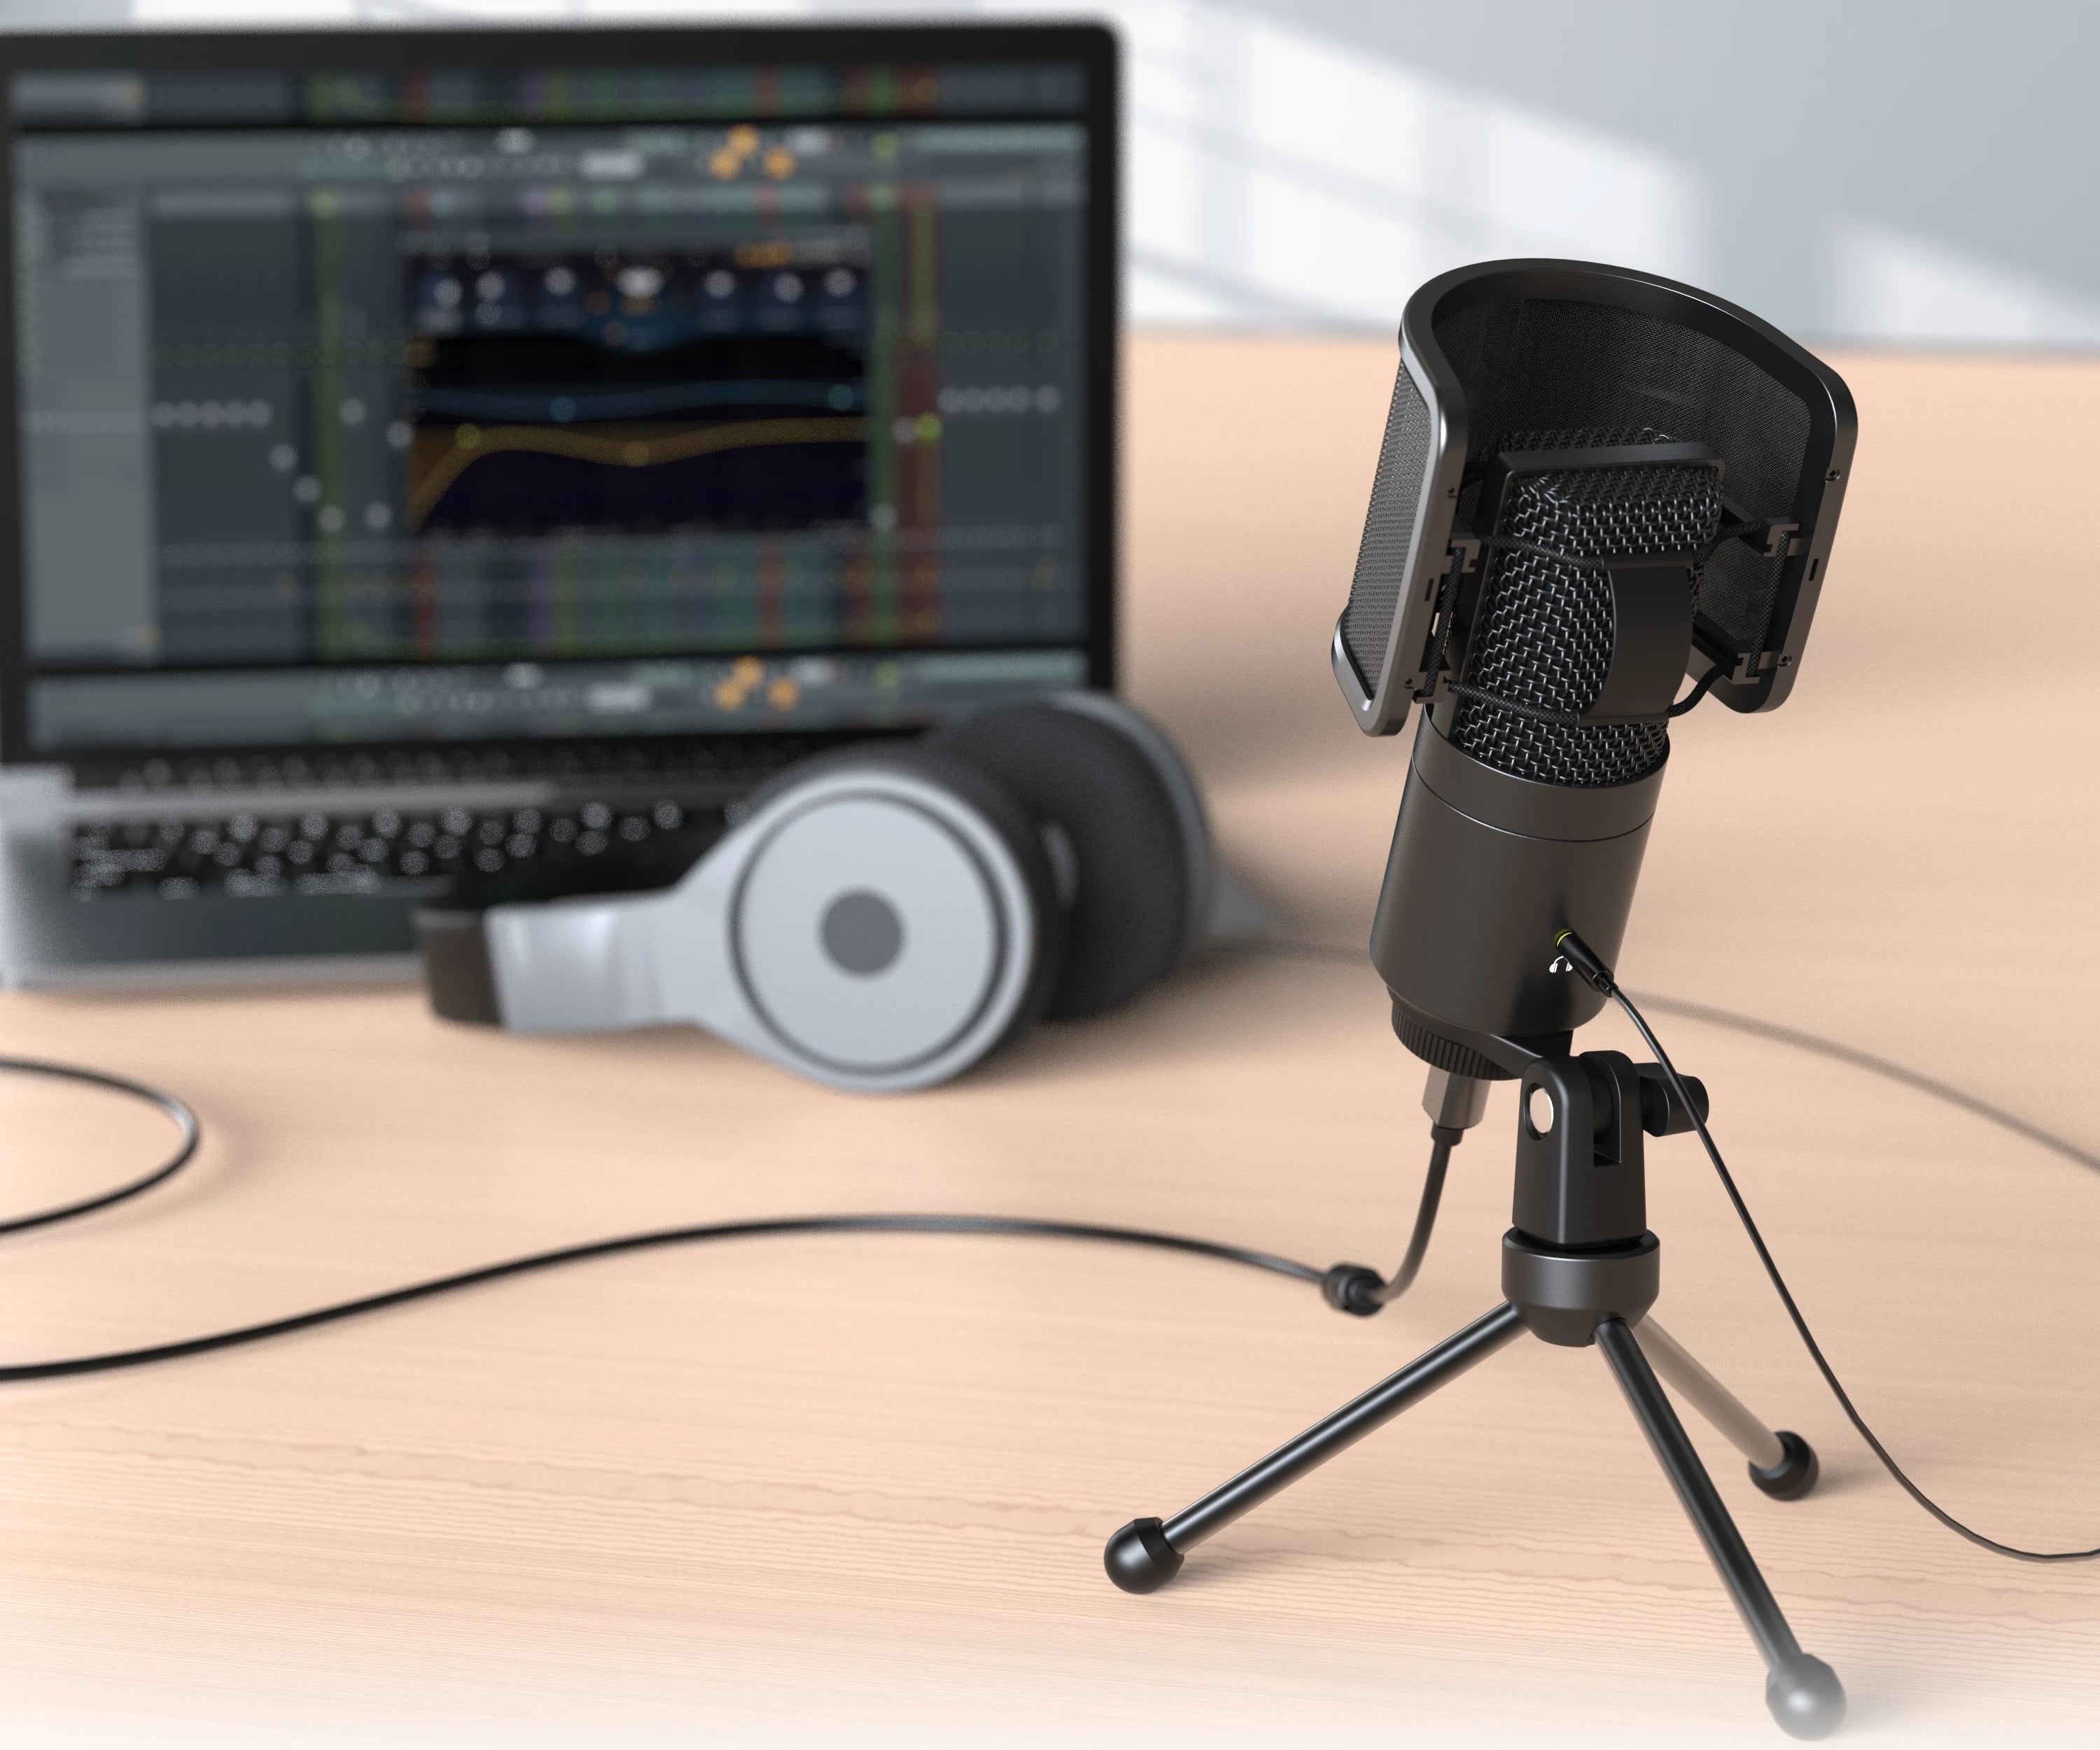 FIFINE K683A Type C USB Mic with A Pop Filter, A Volume Dial, A